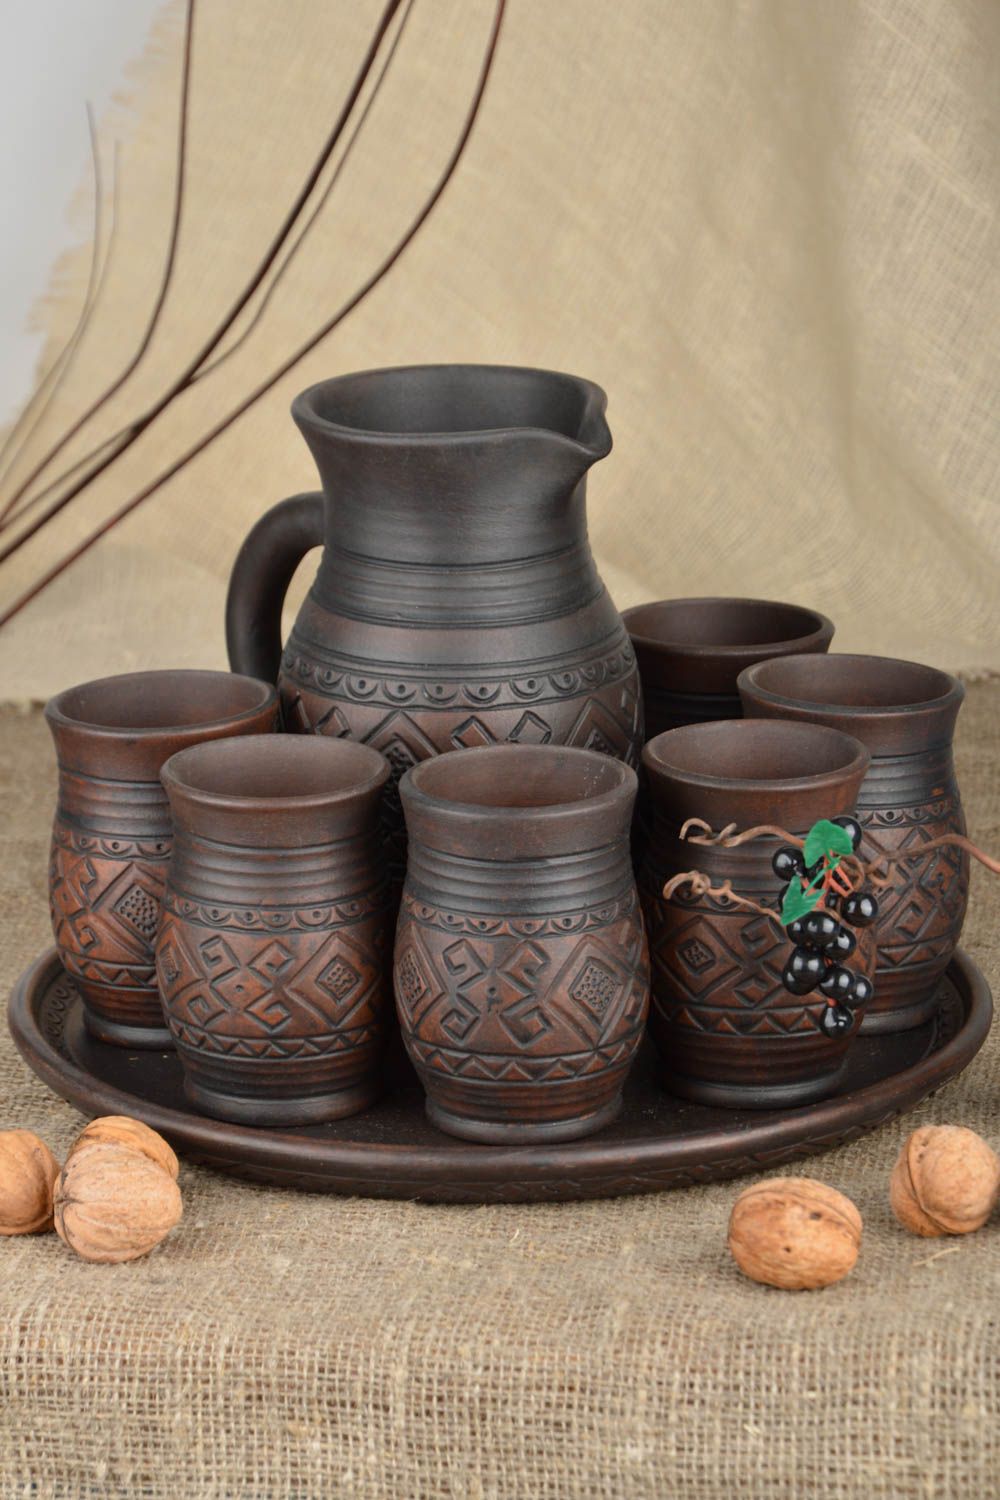 30 oz ceramic wine jug in dark brown color with six wine goblets and ashtray 8,7 lb photo 1